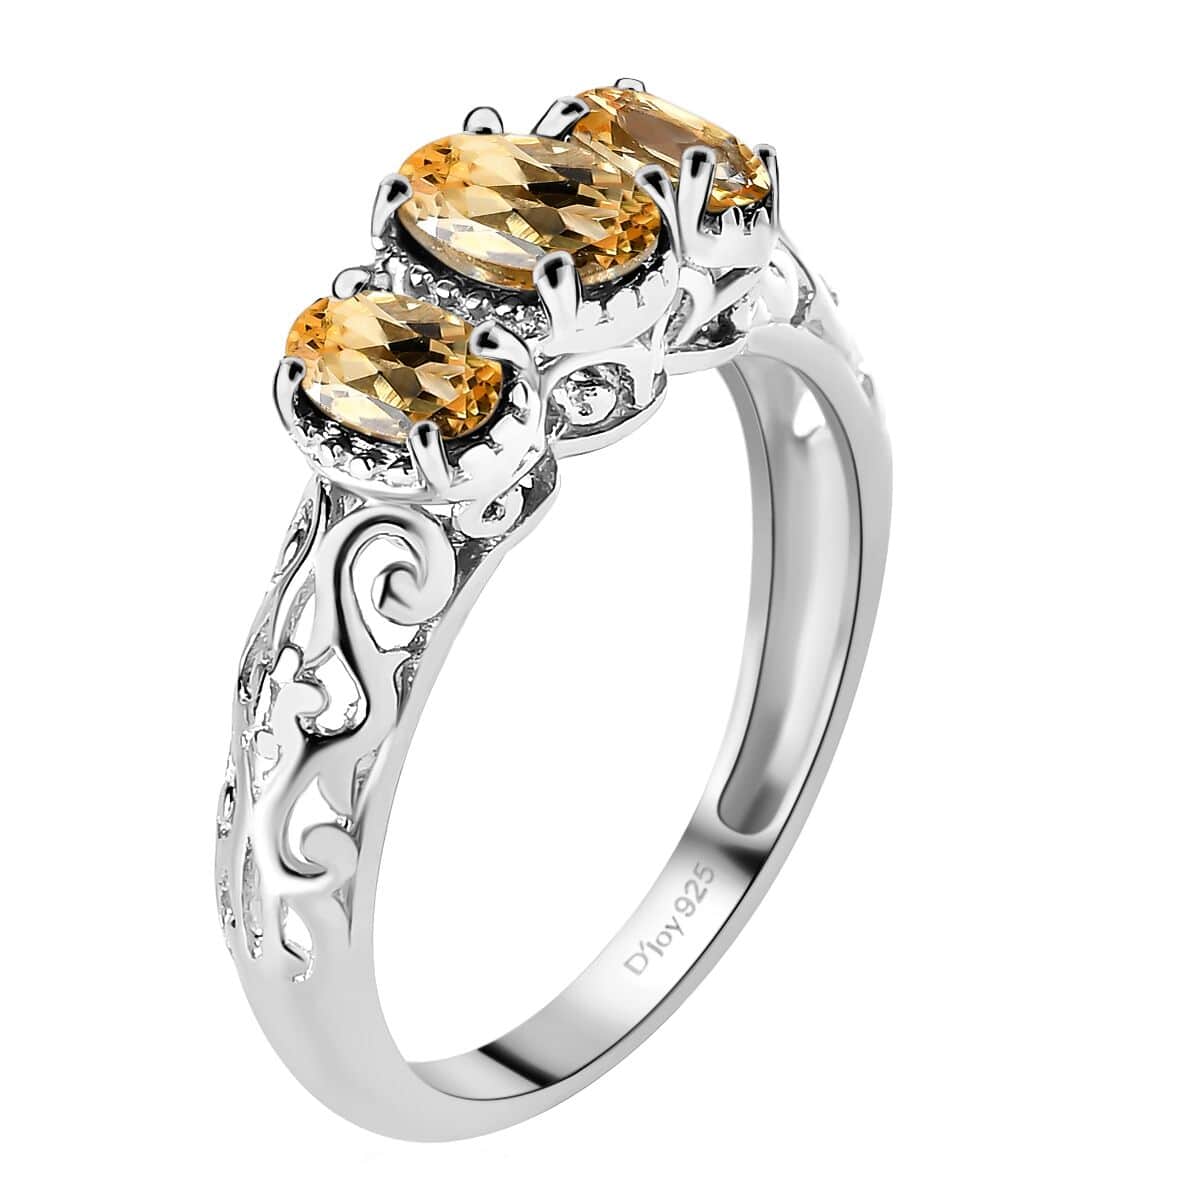 Citrine Ring, 3 Stone Citrine Ring, Trilogy Ring, Sterling Silver Ring, Birthstone Jewelry, Brazilian Citrine 3 Stone Ring 0.90 ctw (Size 10.0) image number 5